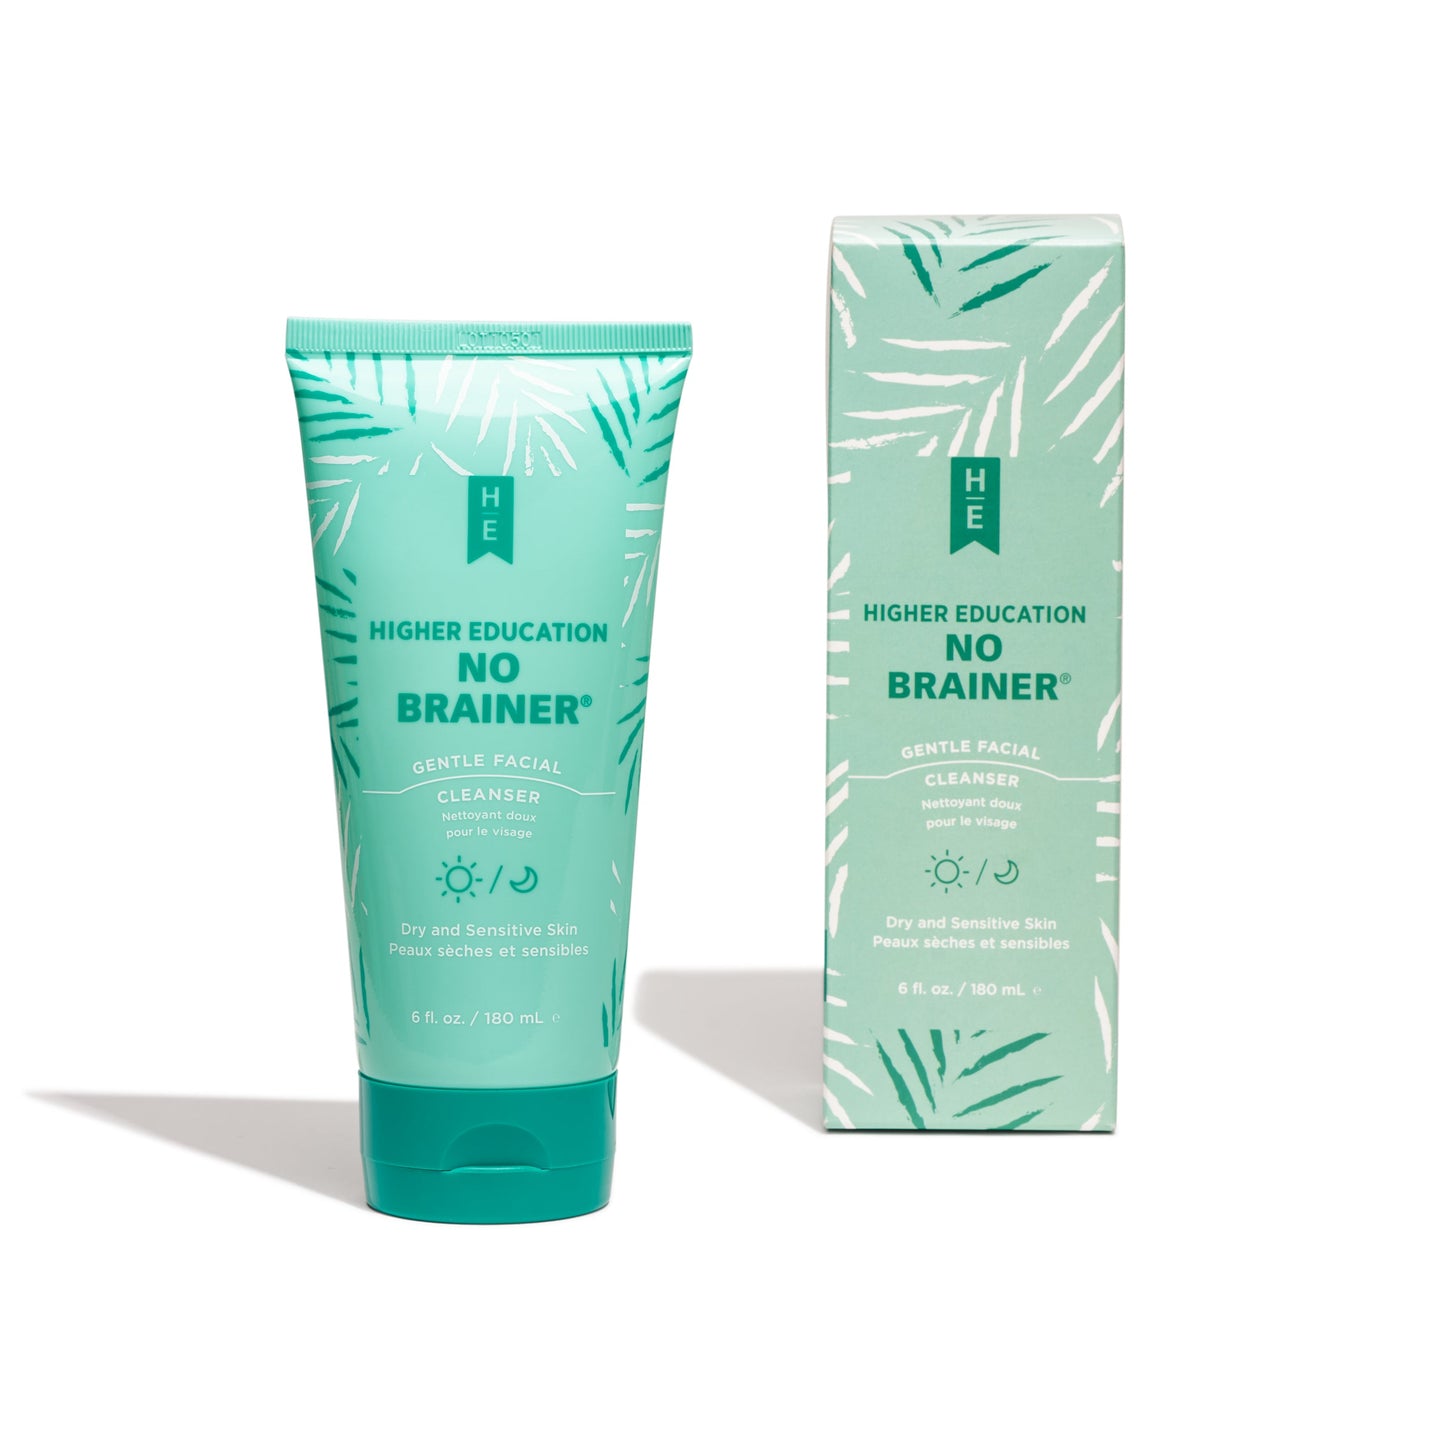 Higher Education Skincare No Brainer® - Gentle Facial Cleanser